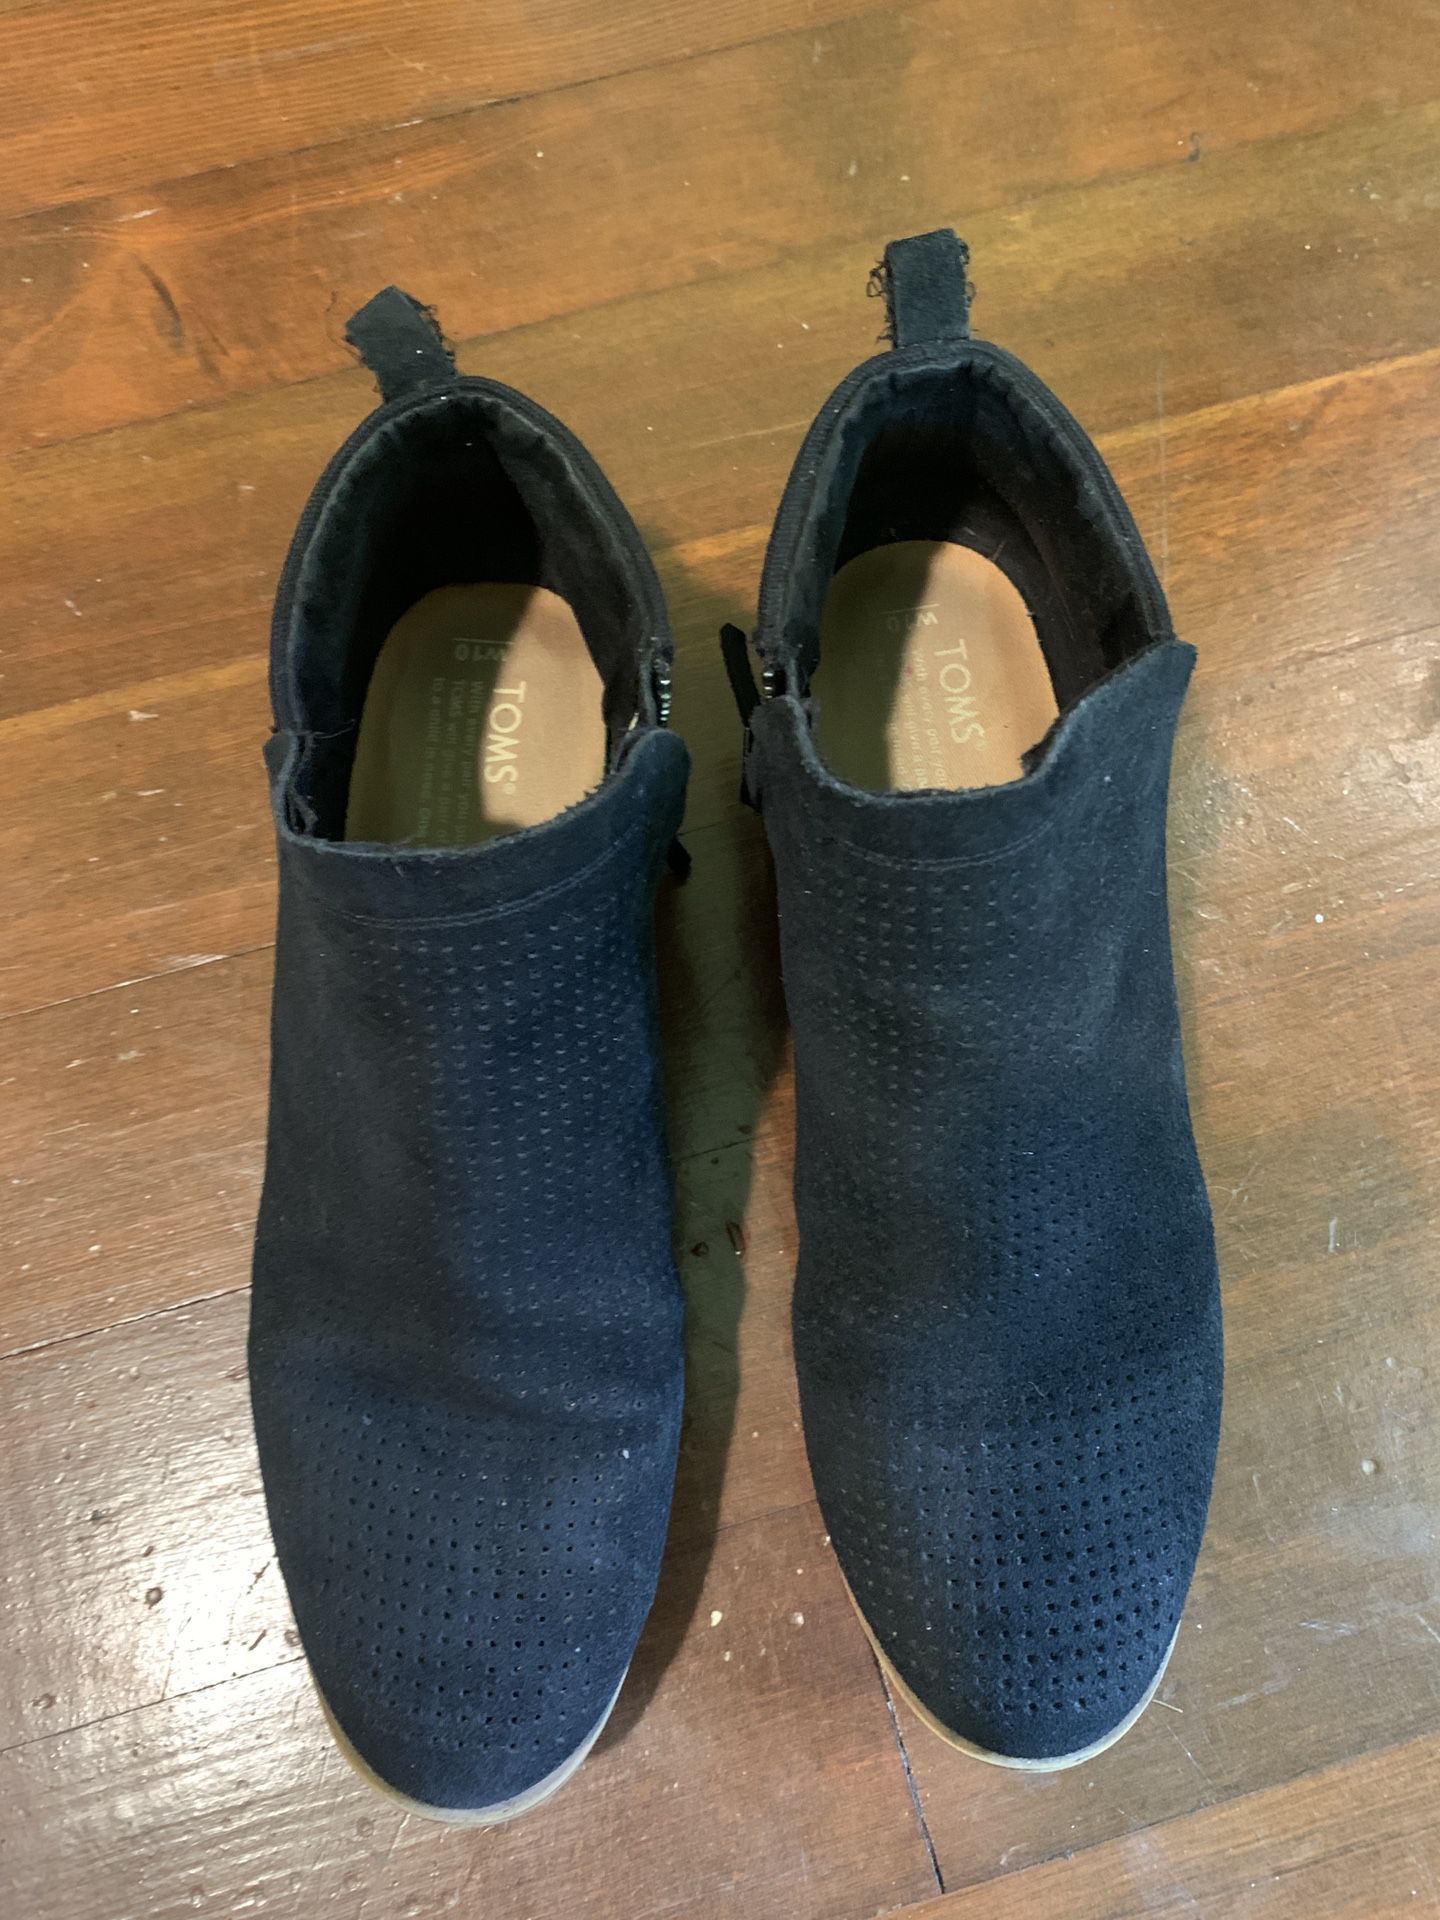 TOMS Women’s Boot Size 10 